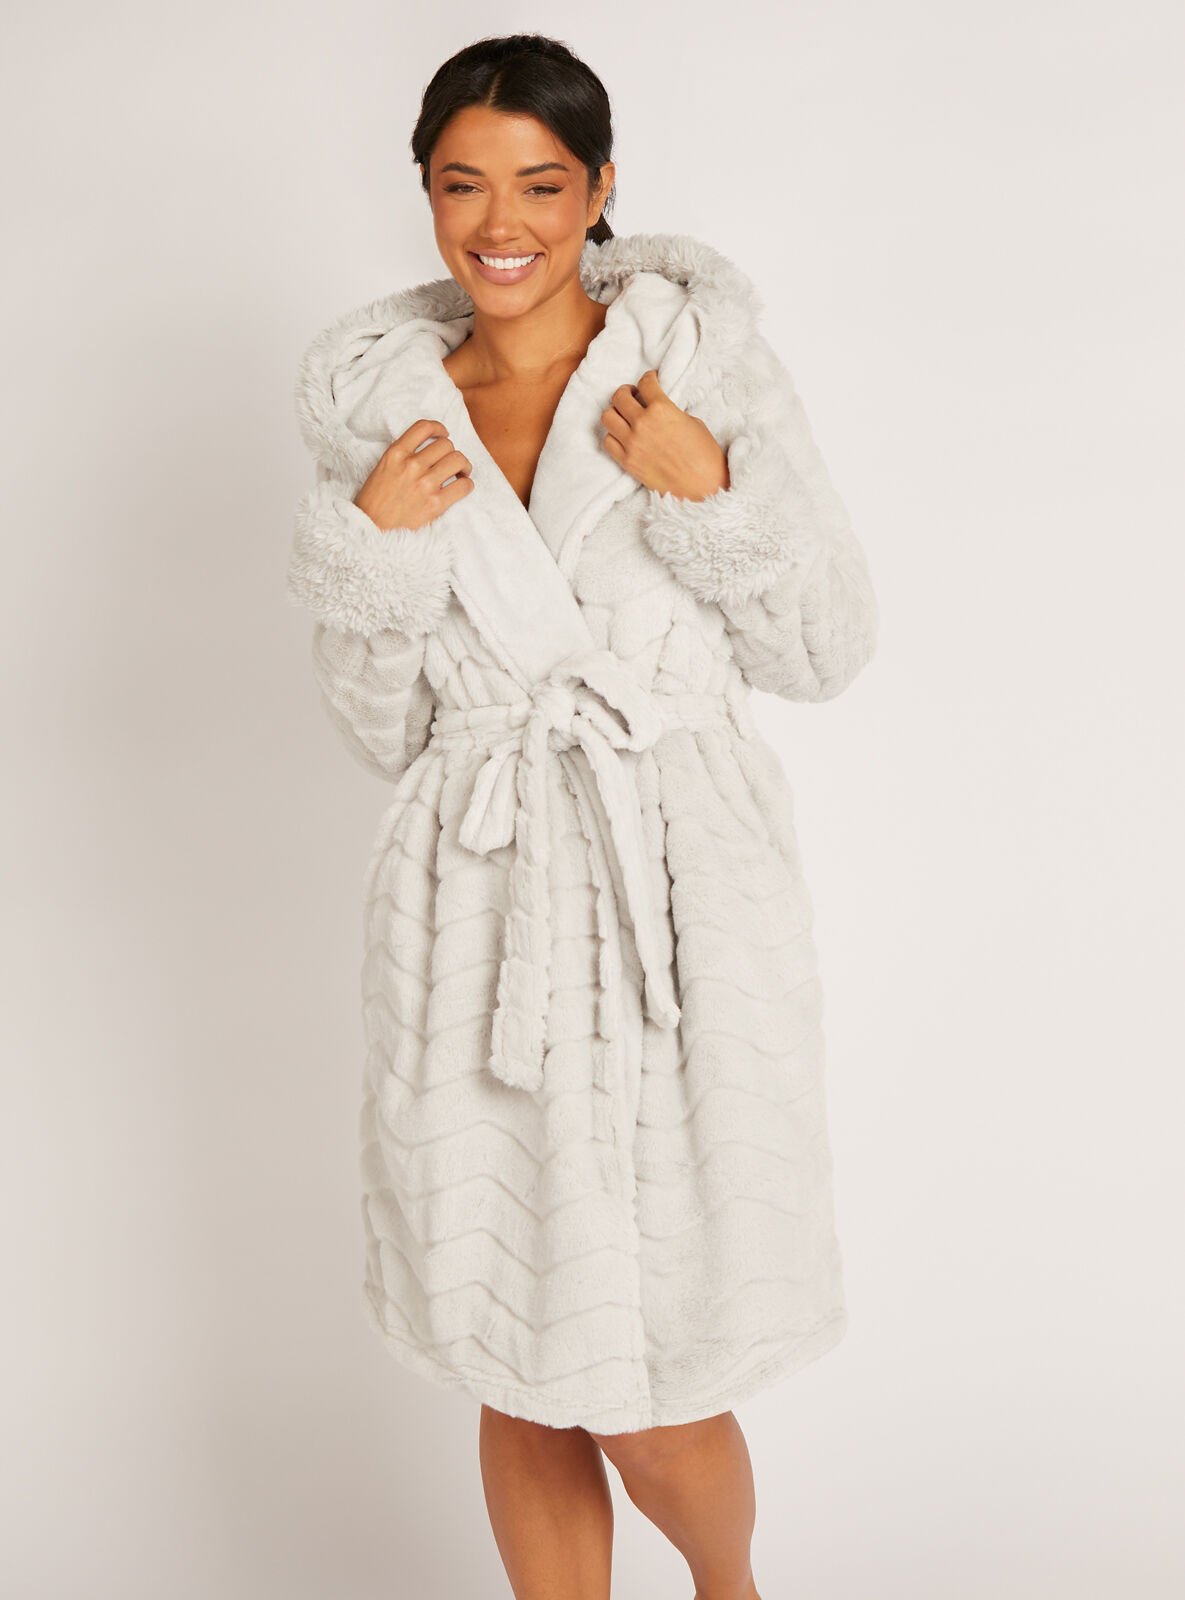 Fleece Supersoft Hooded Dressing Gown